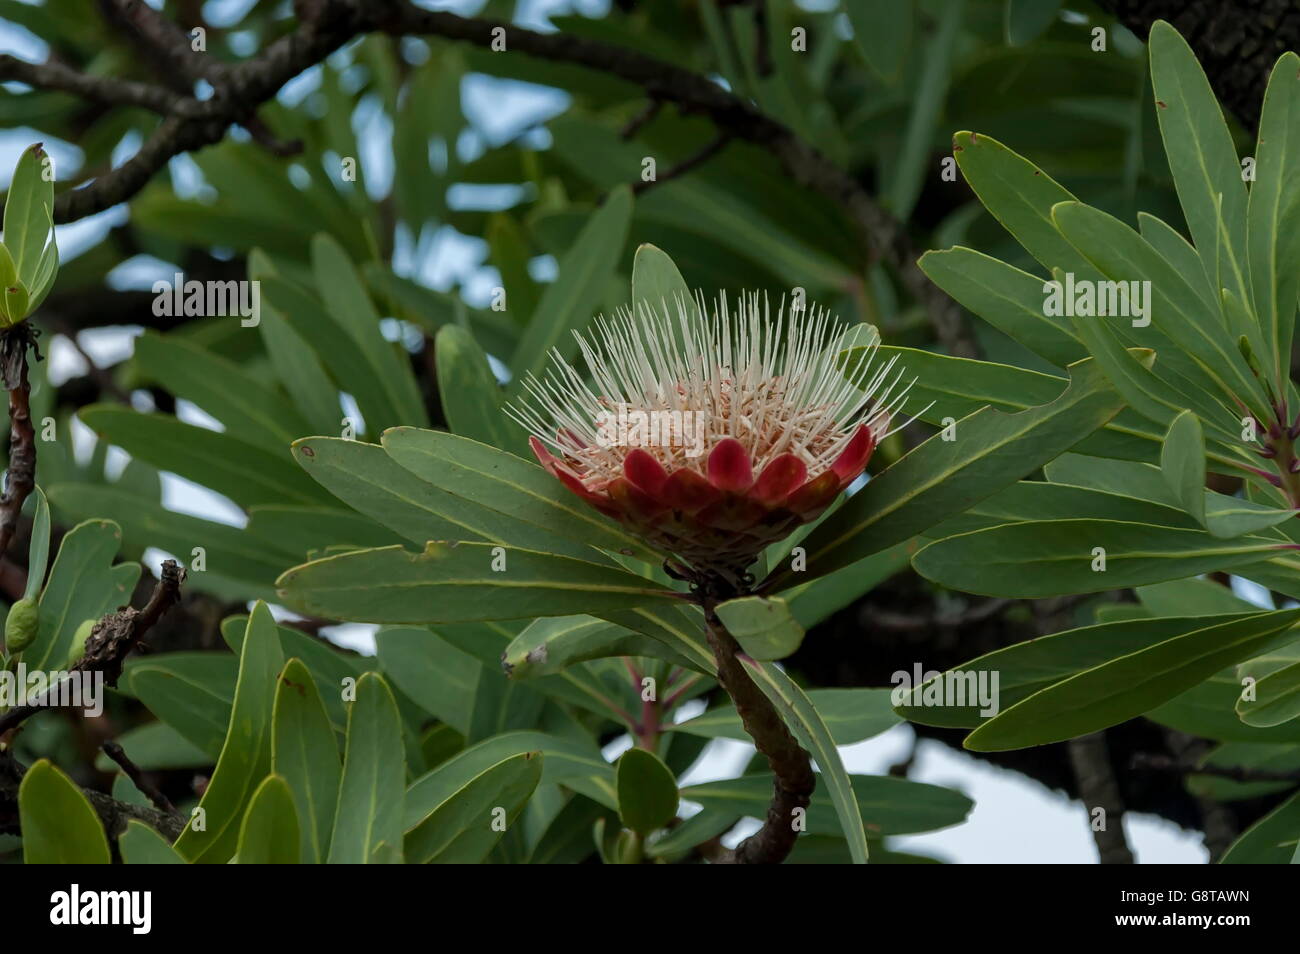 Protea flowers, South African flowering plants, sugarbushes Stock Photo